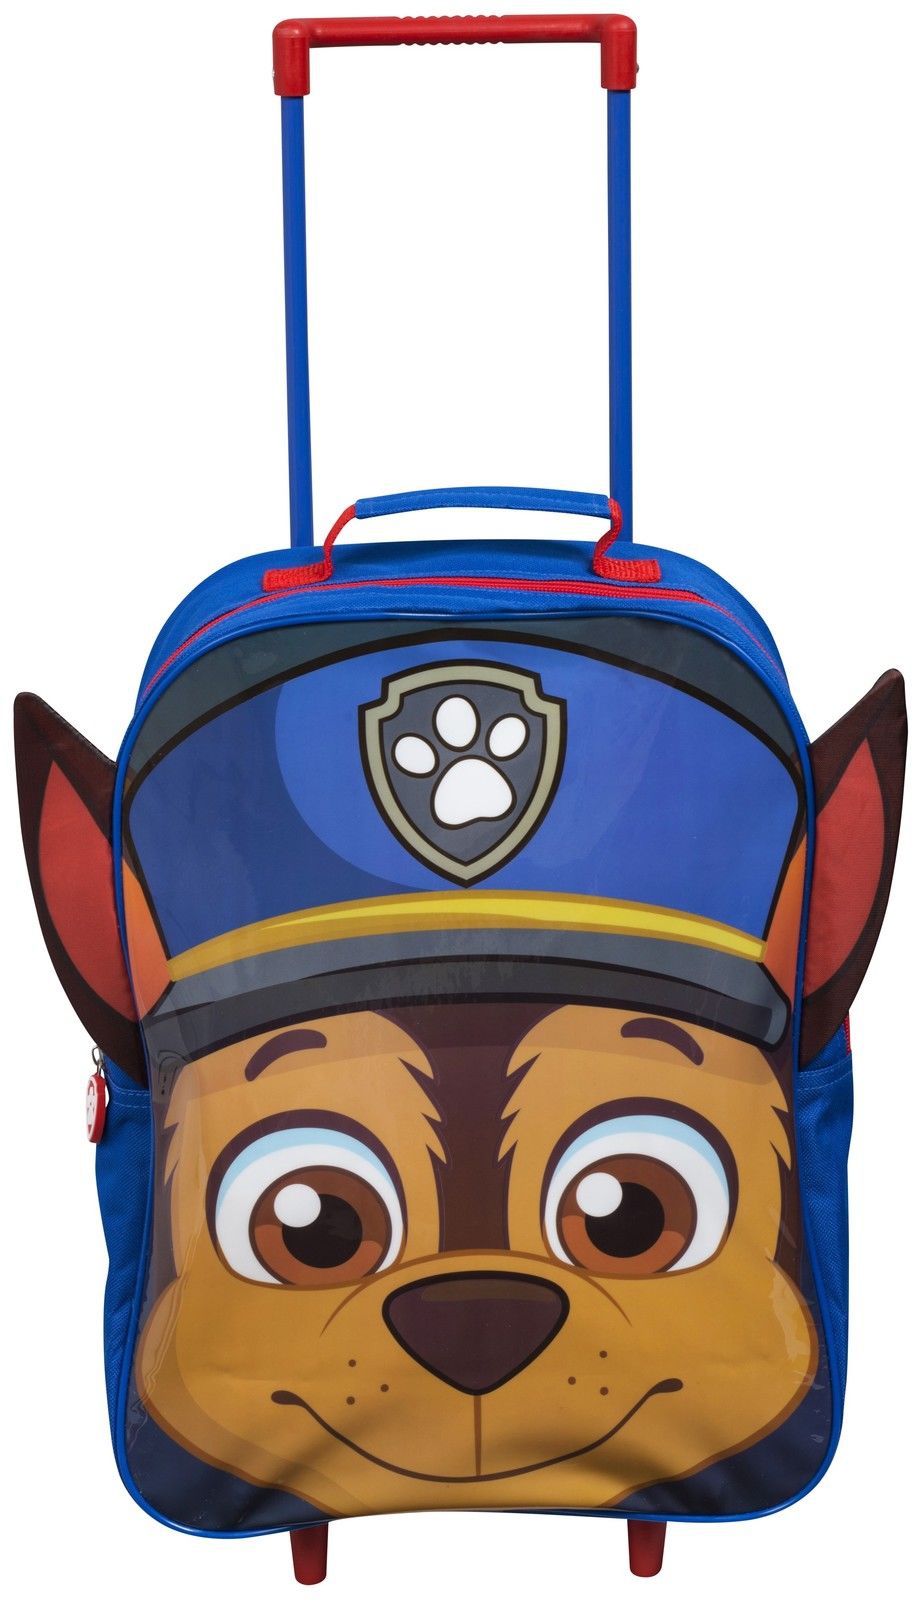 Paw Patrol 'Chase' Boys Pvc Front with Ears School Travel Trolley Roller Wheeled Bag